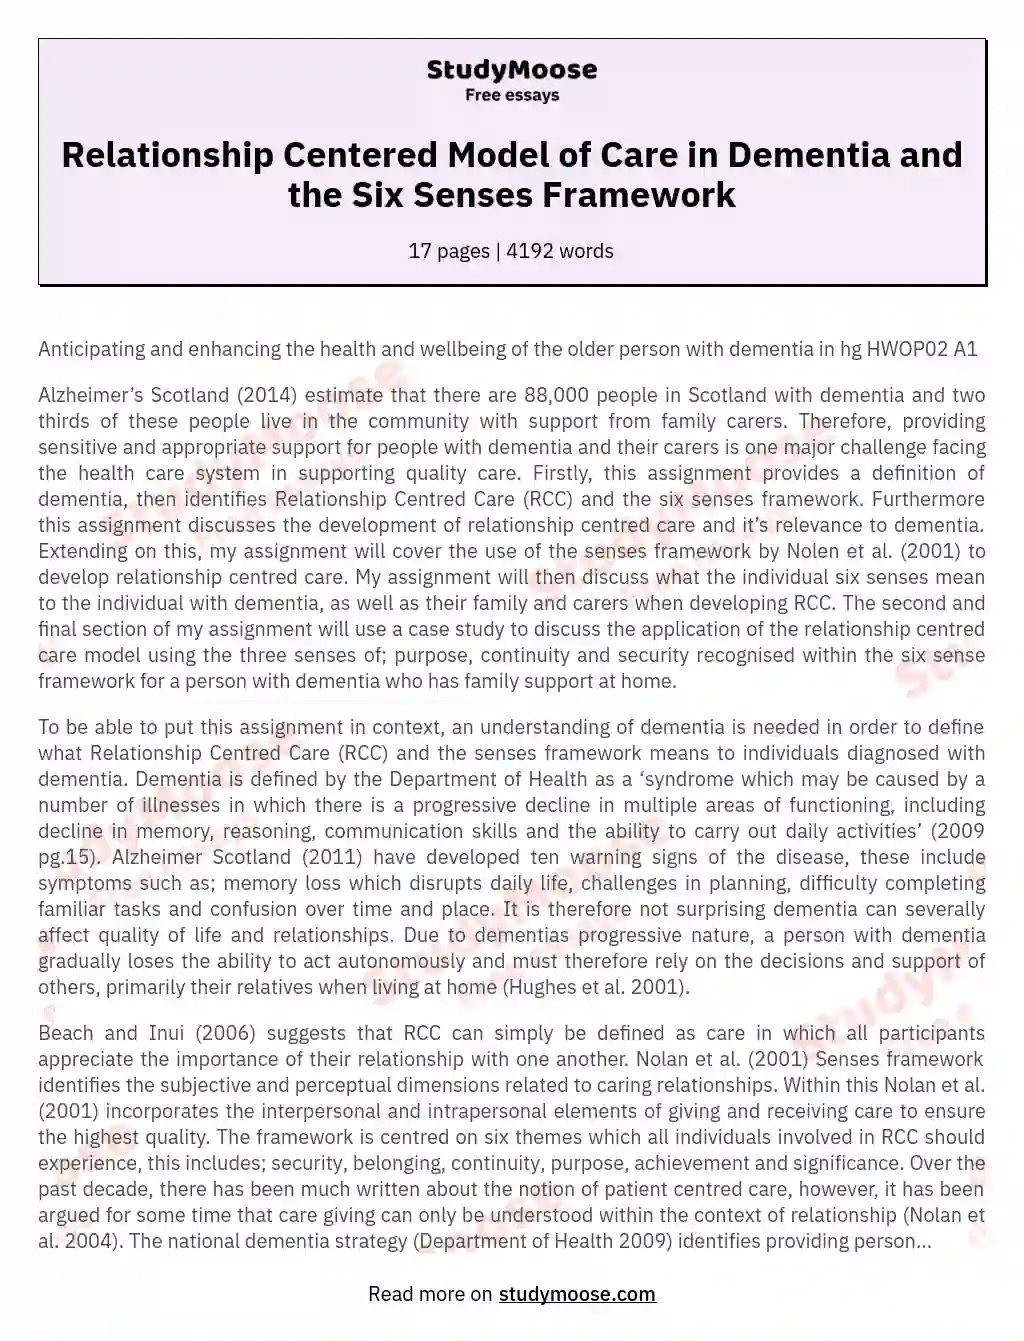 Relationship Centered Model of Care in Dementia and the Six Senses Framework essay